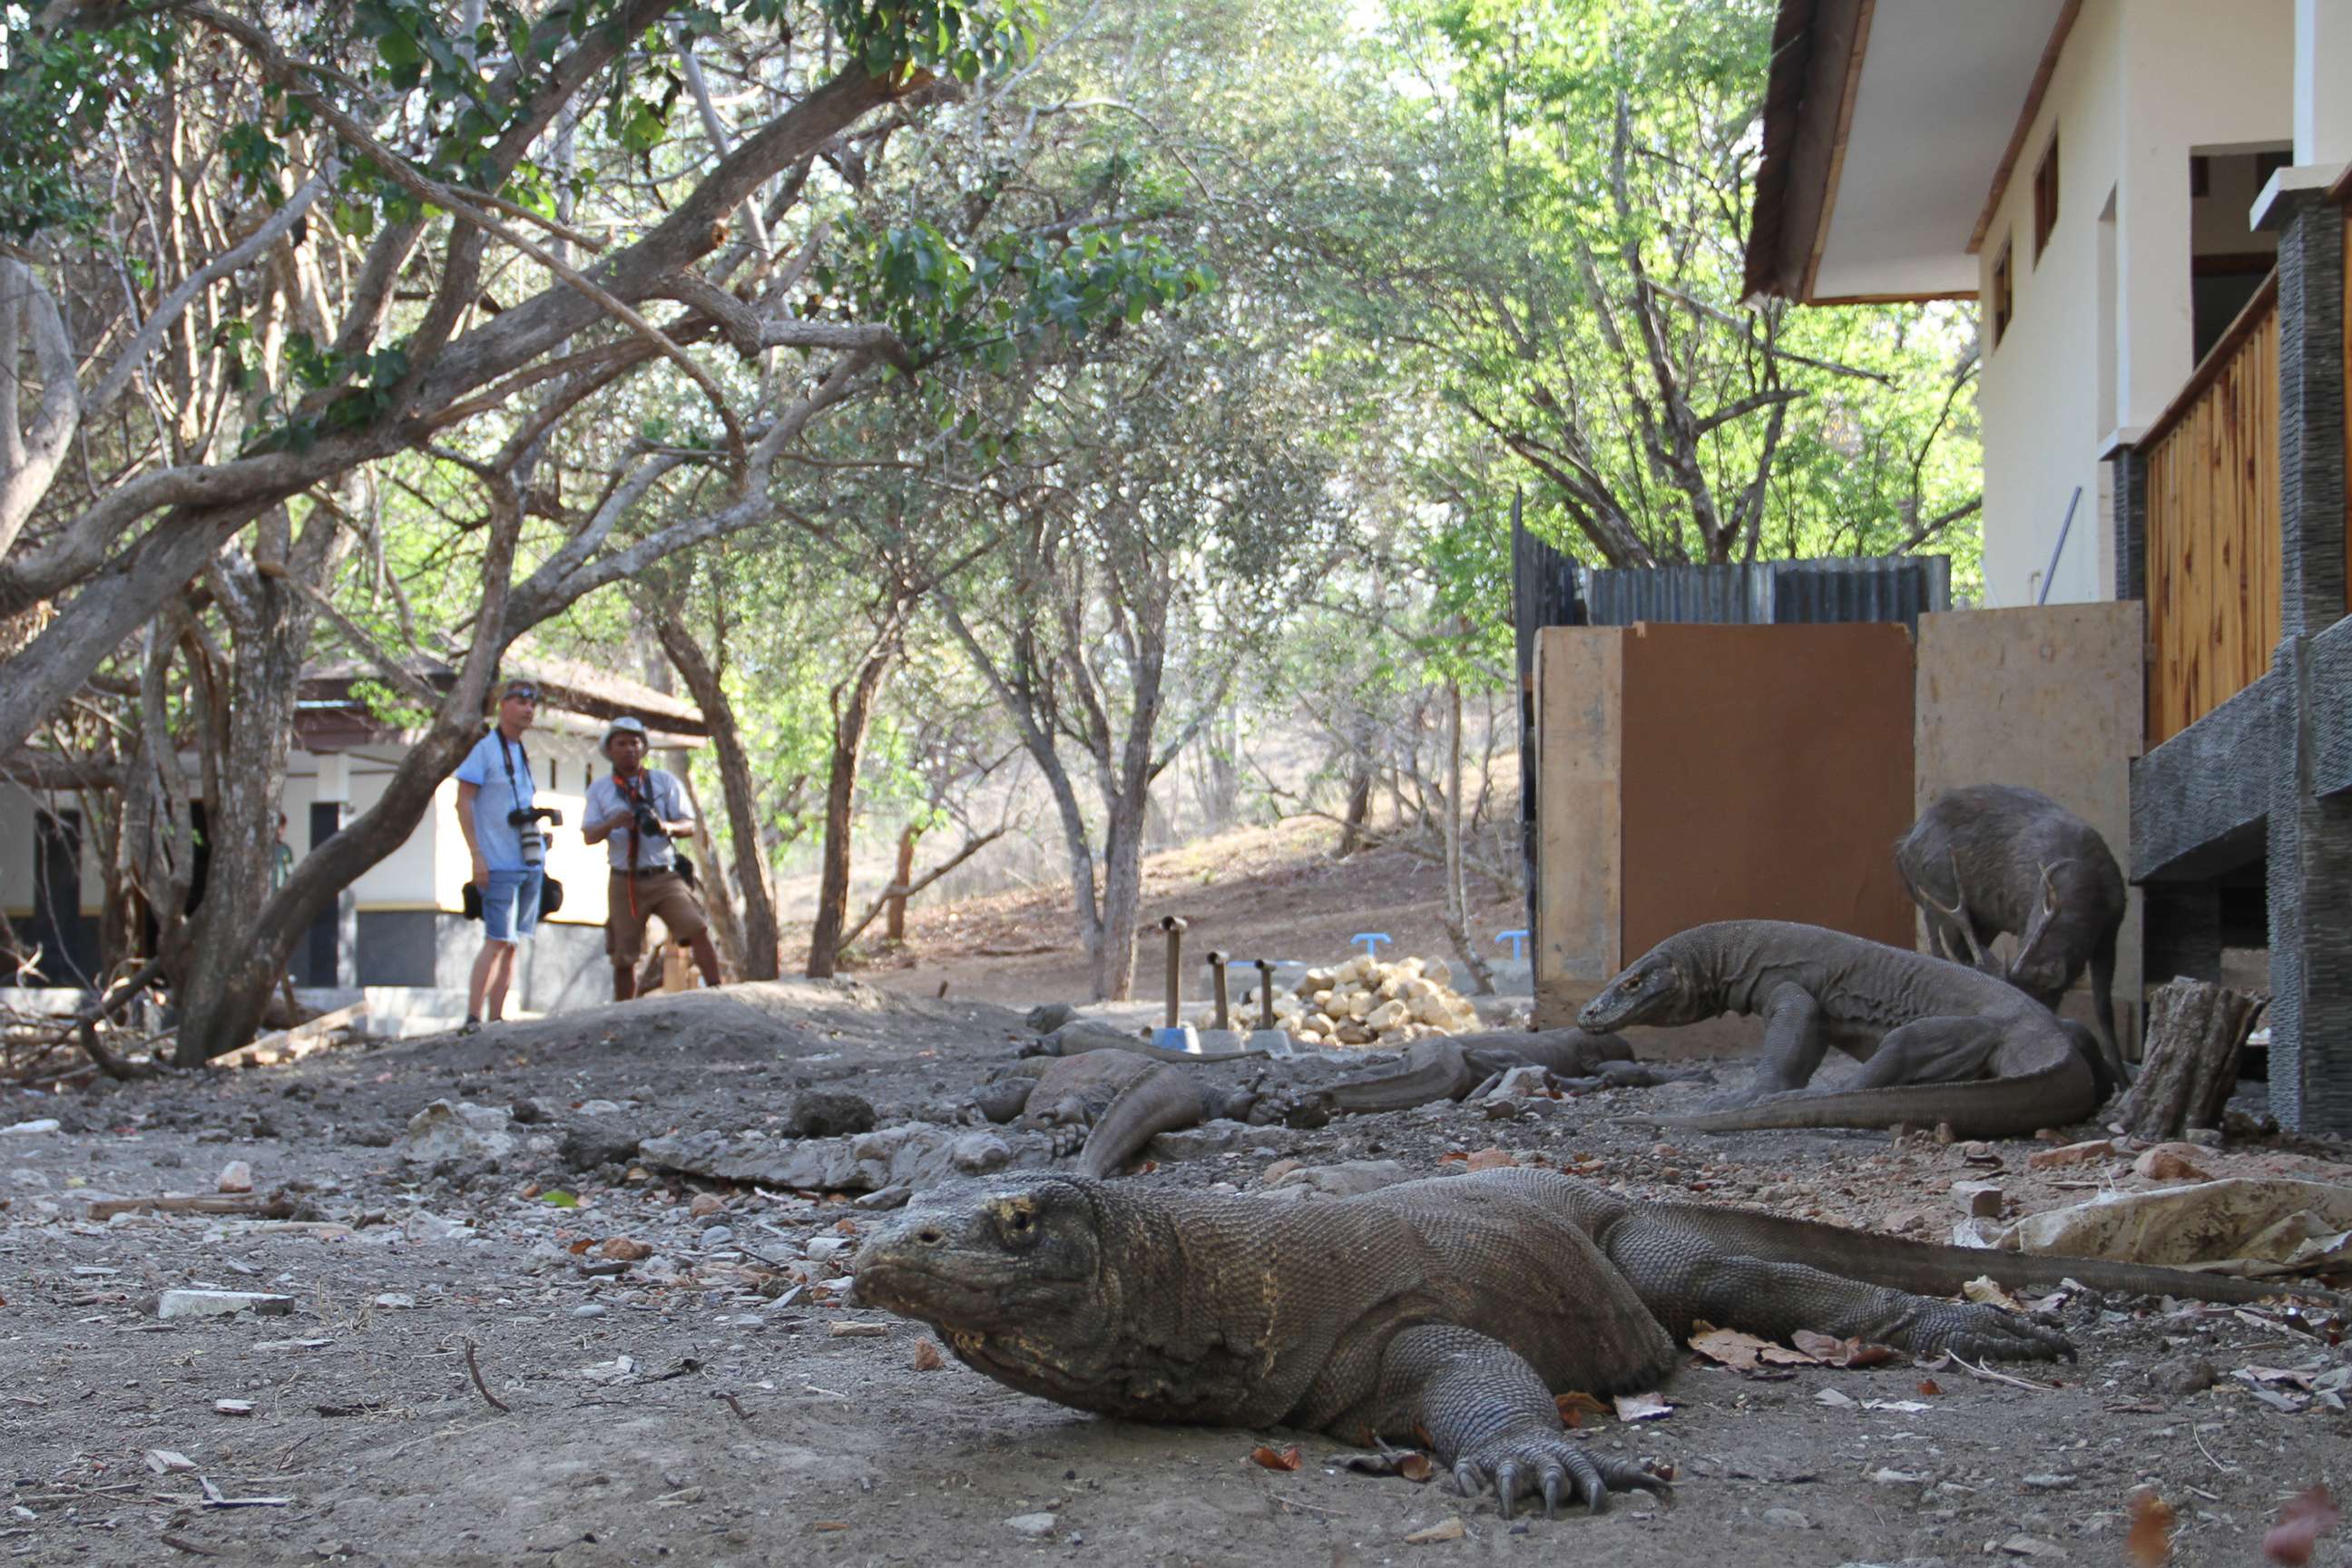 PHOTO: Komodo Dragons who have been habituated to co-occur with humans.